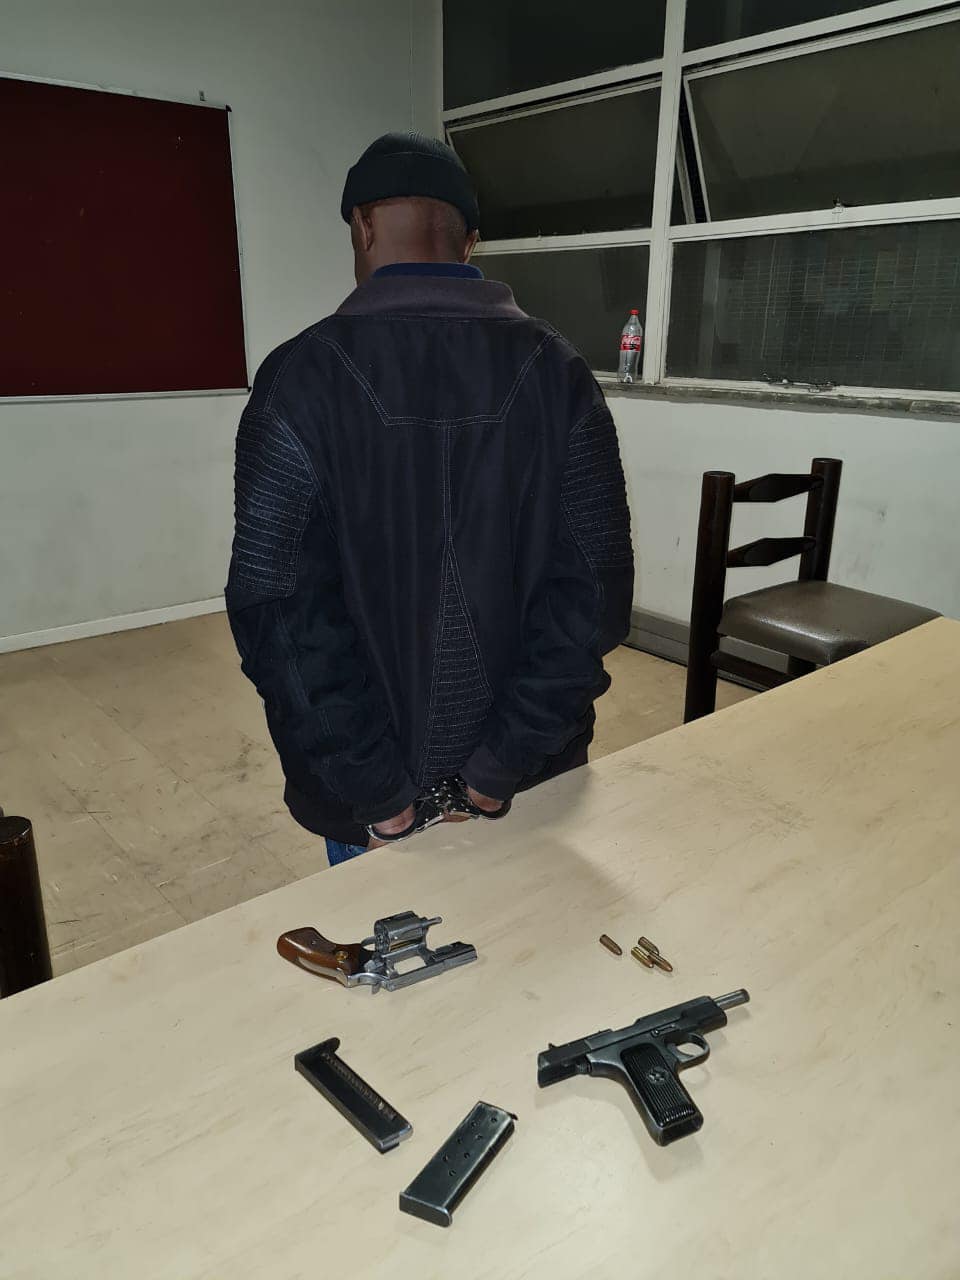 One suspect was arrested in Buhle Park for possession of unlicensed firearms and ammunition